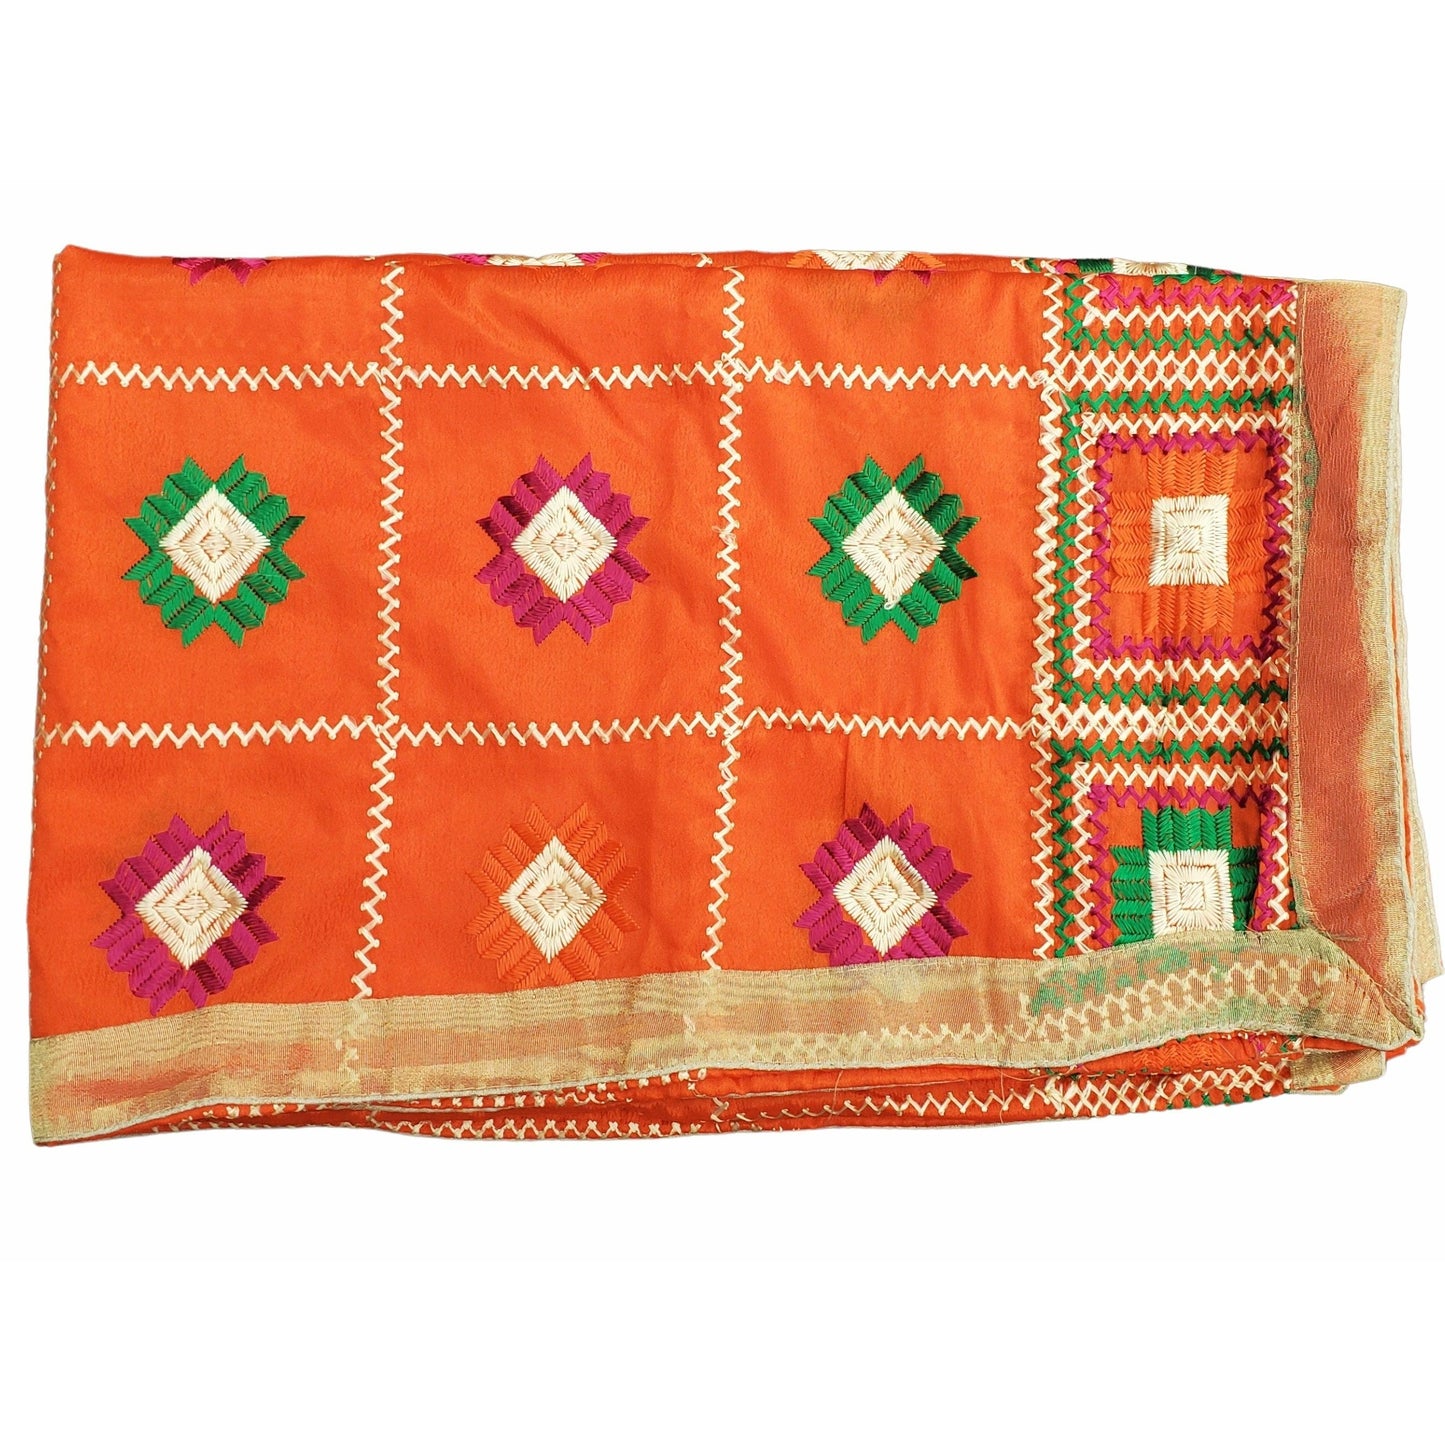 Beautiful Fulkari with Orange base and multi color flower patter + golden lace on all the borders